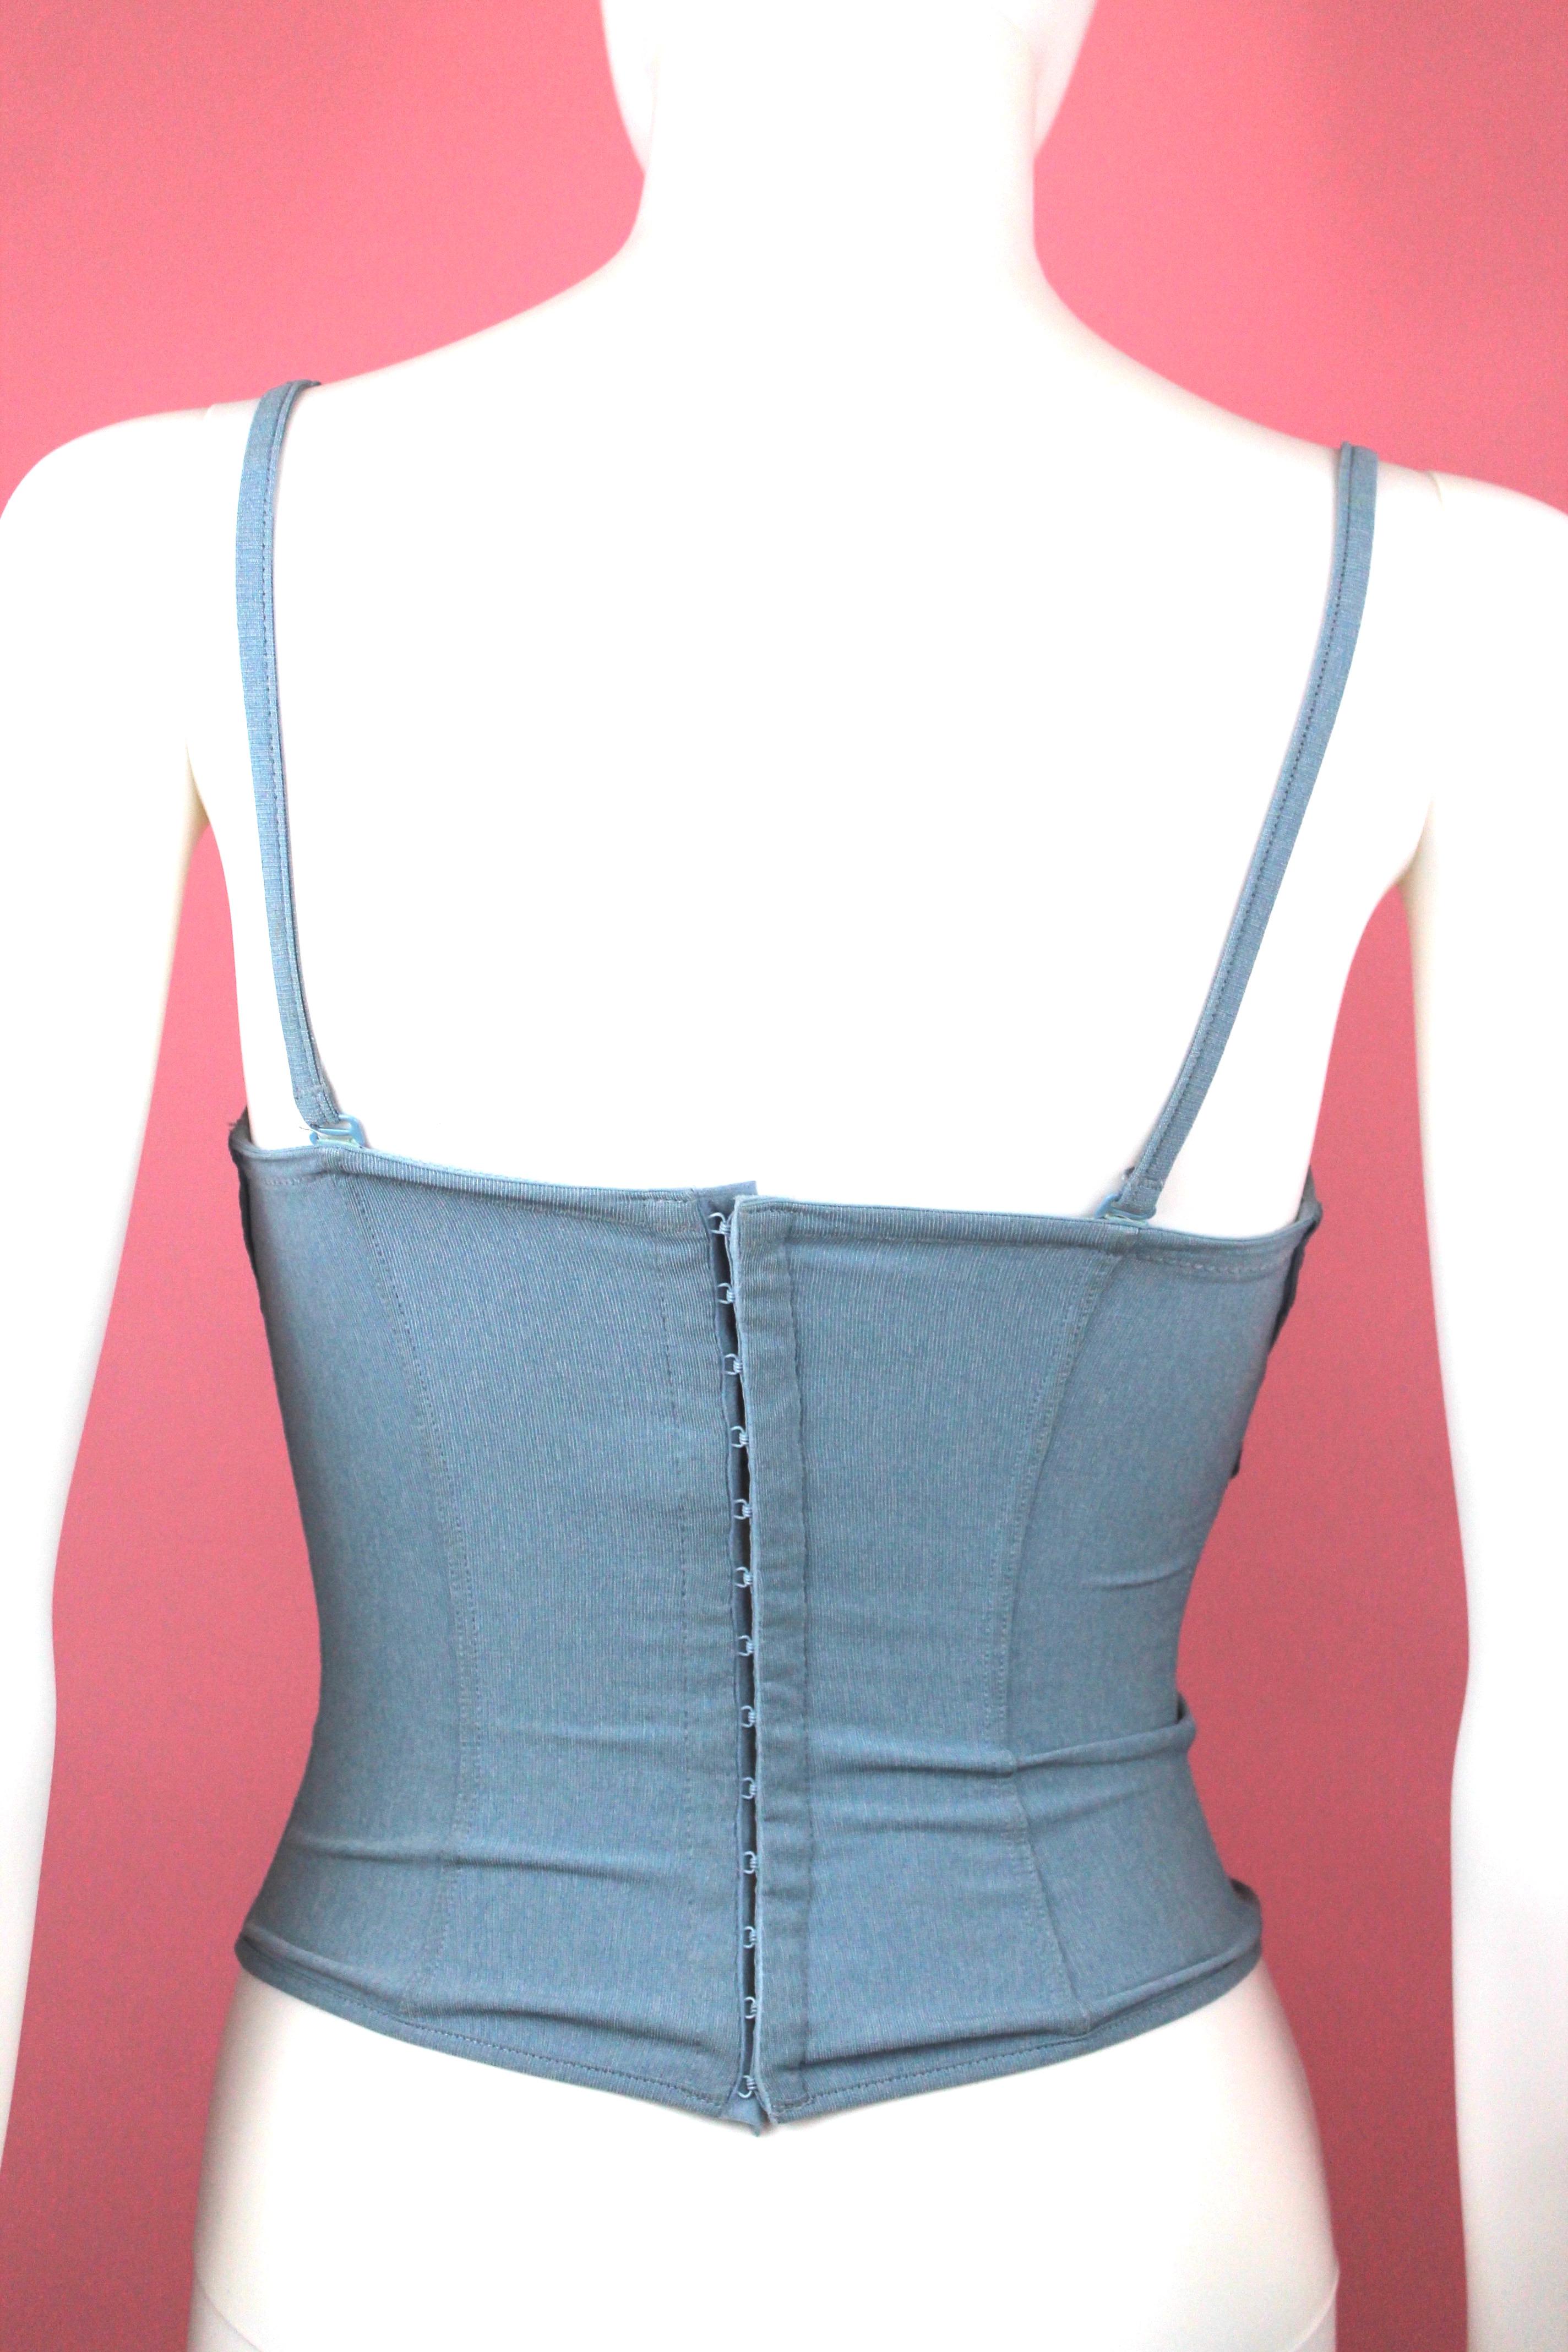 Women's Christian Dior Light Blue Bustier with Lace Up Detail, c. 2000's, Size US 2